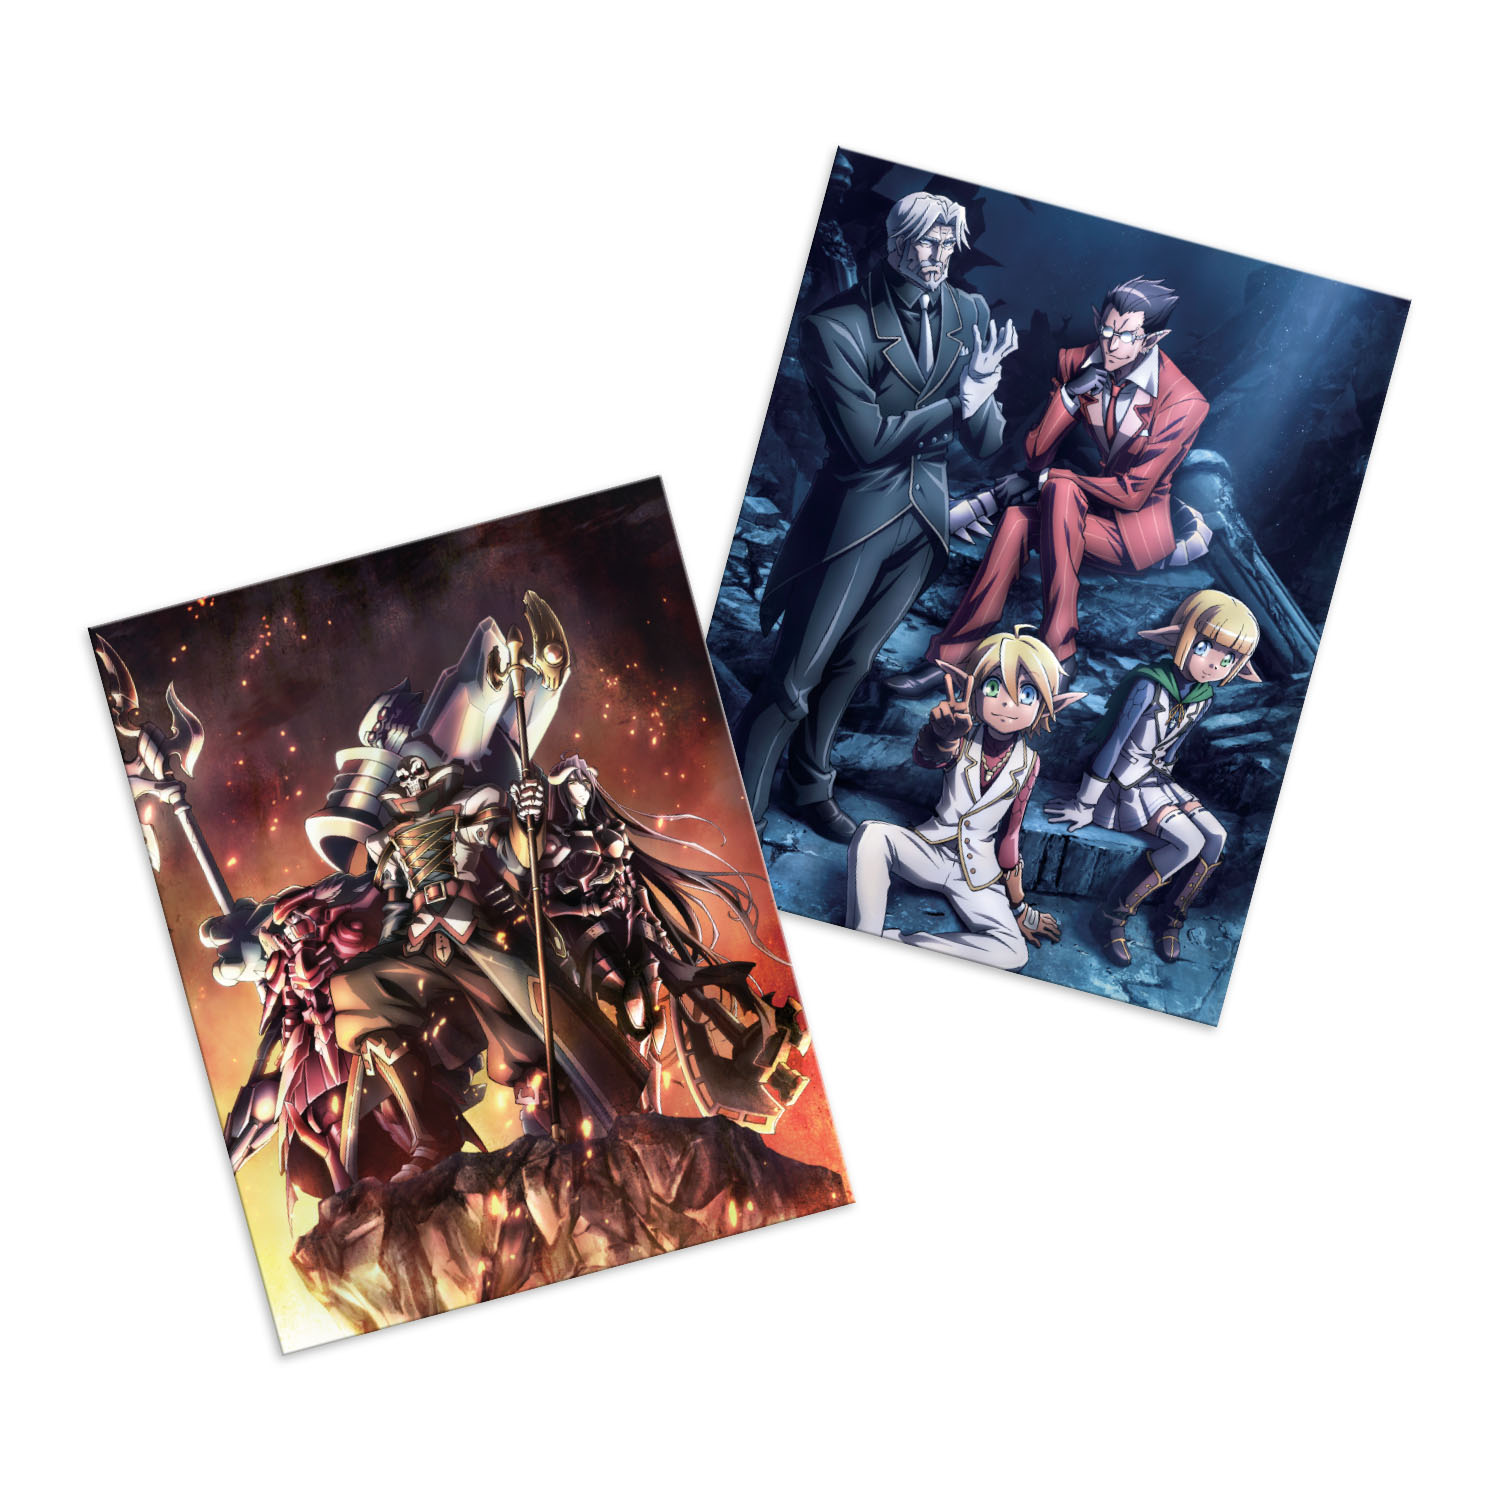 Overlord IV - Season 4 - Blu-ray + DVD - Limited Edition image count 7